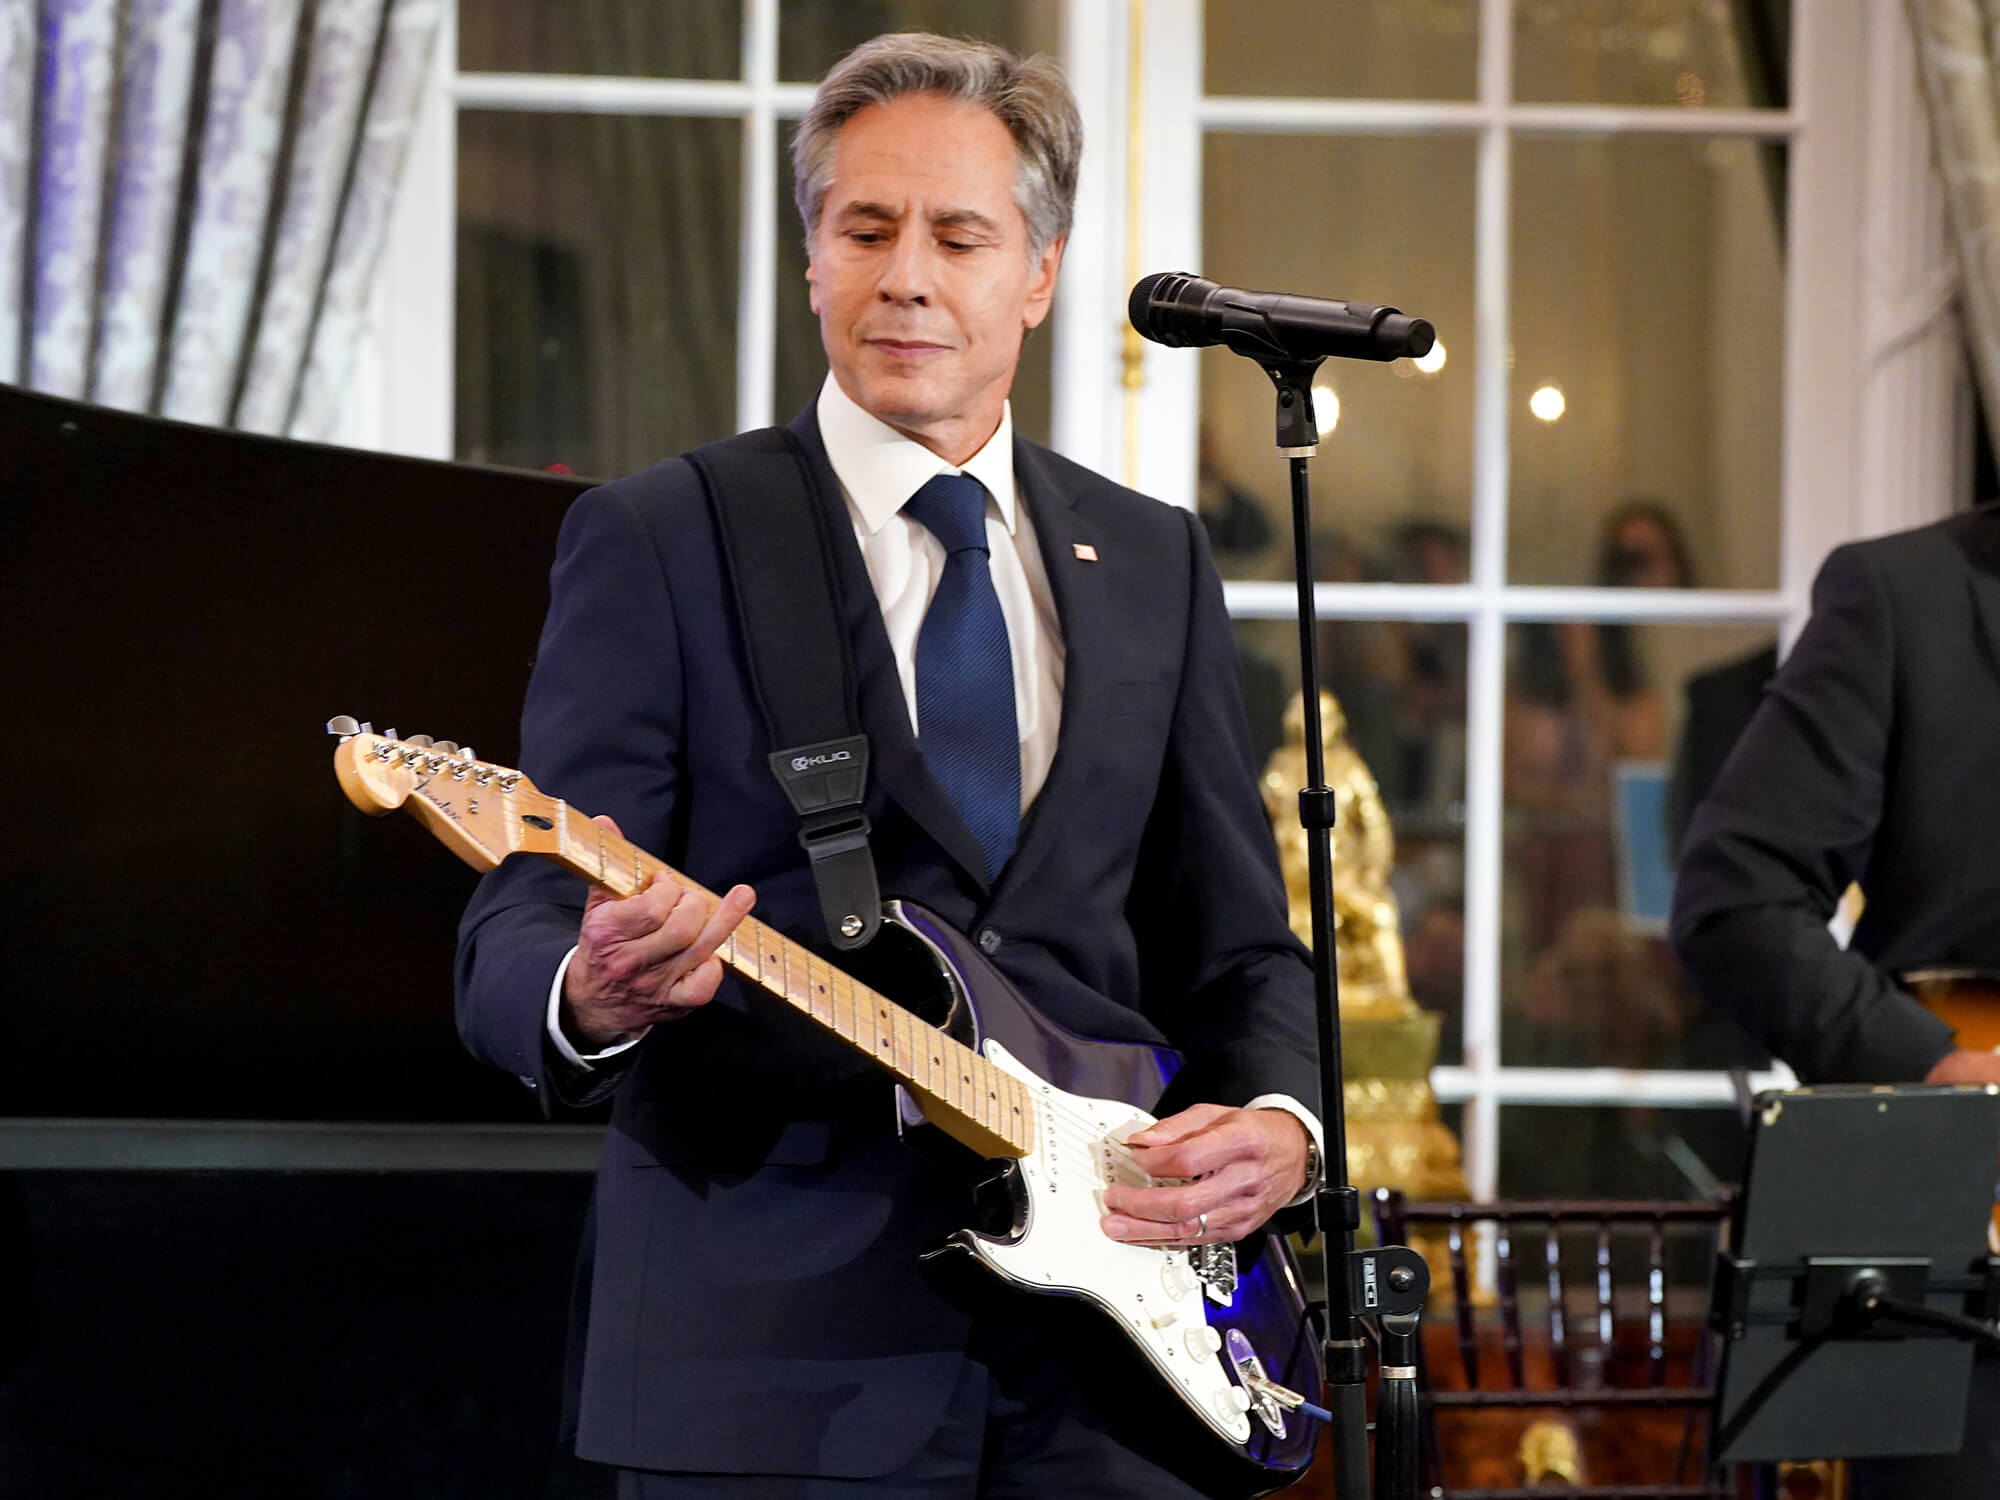 U.S. Secretary of State Antony Blinken performs onstage during the launch of the Global Music Diplomacy Initiative